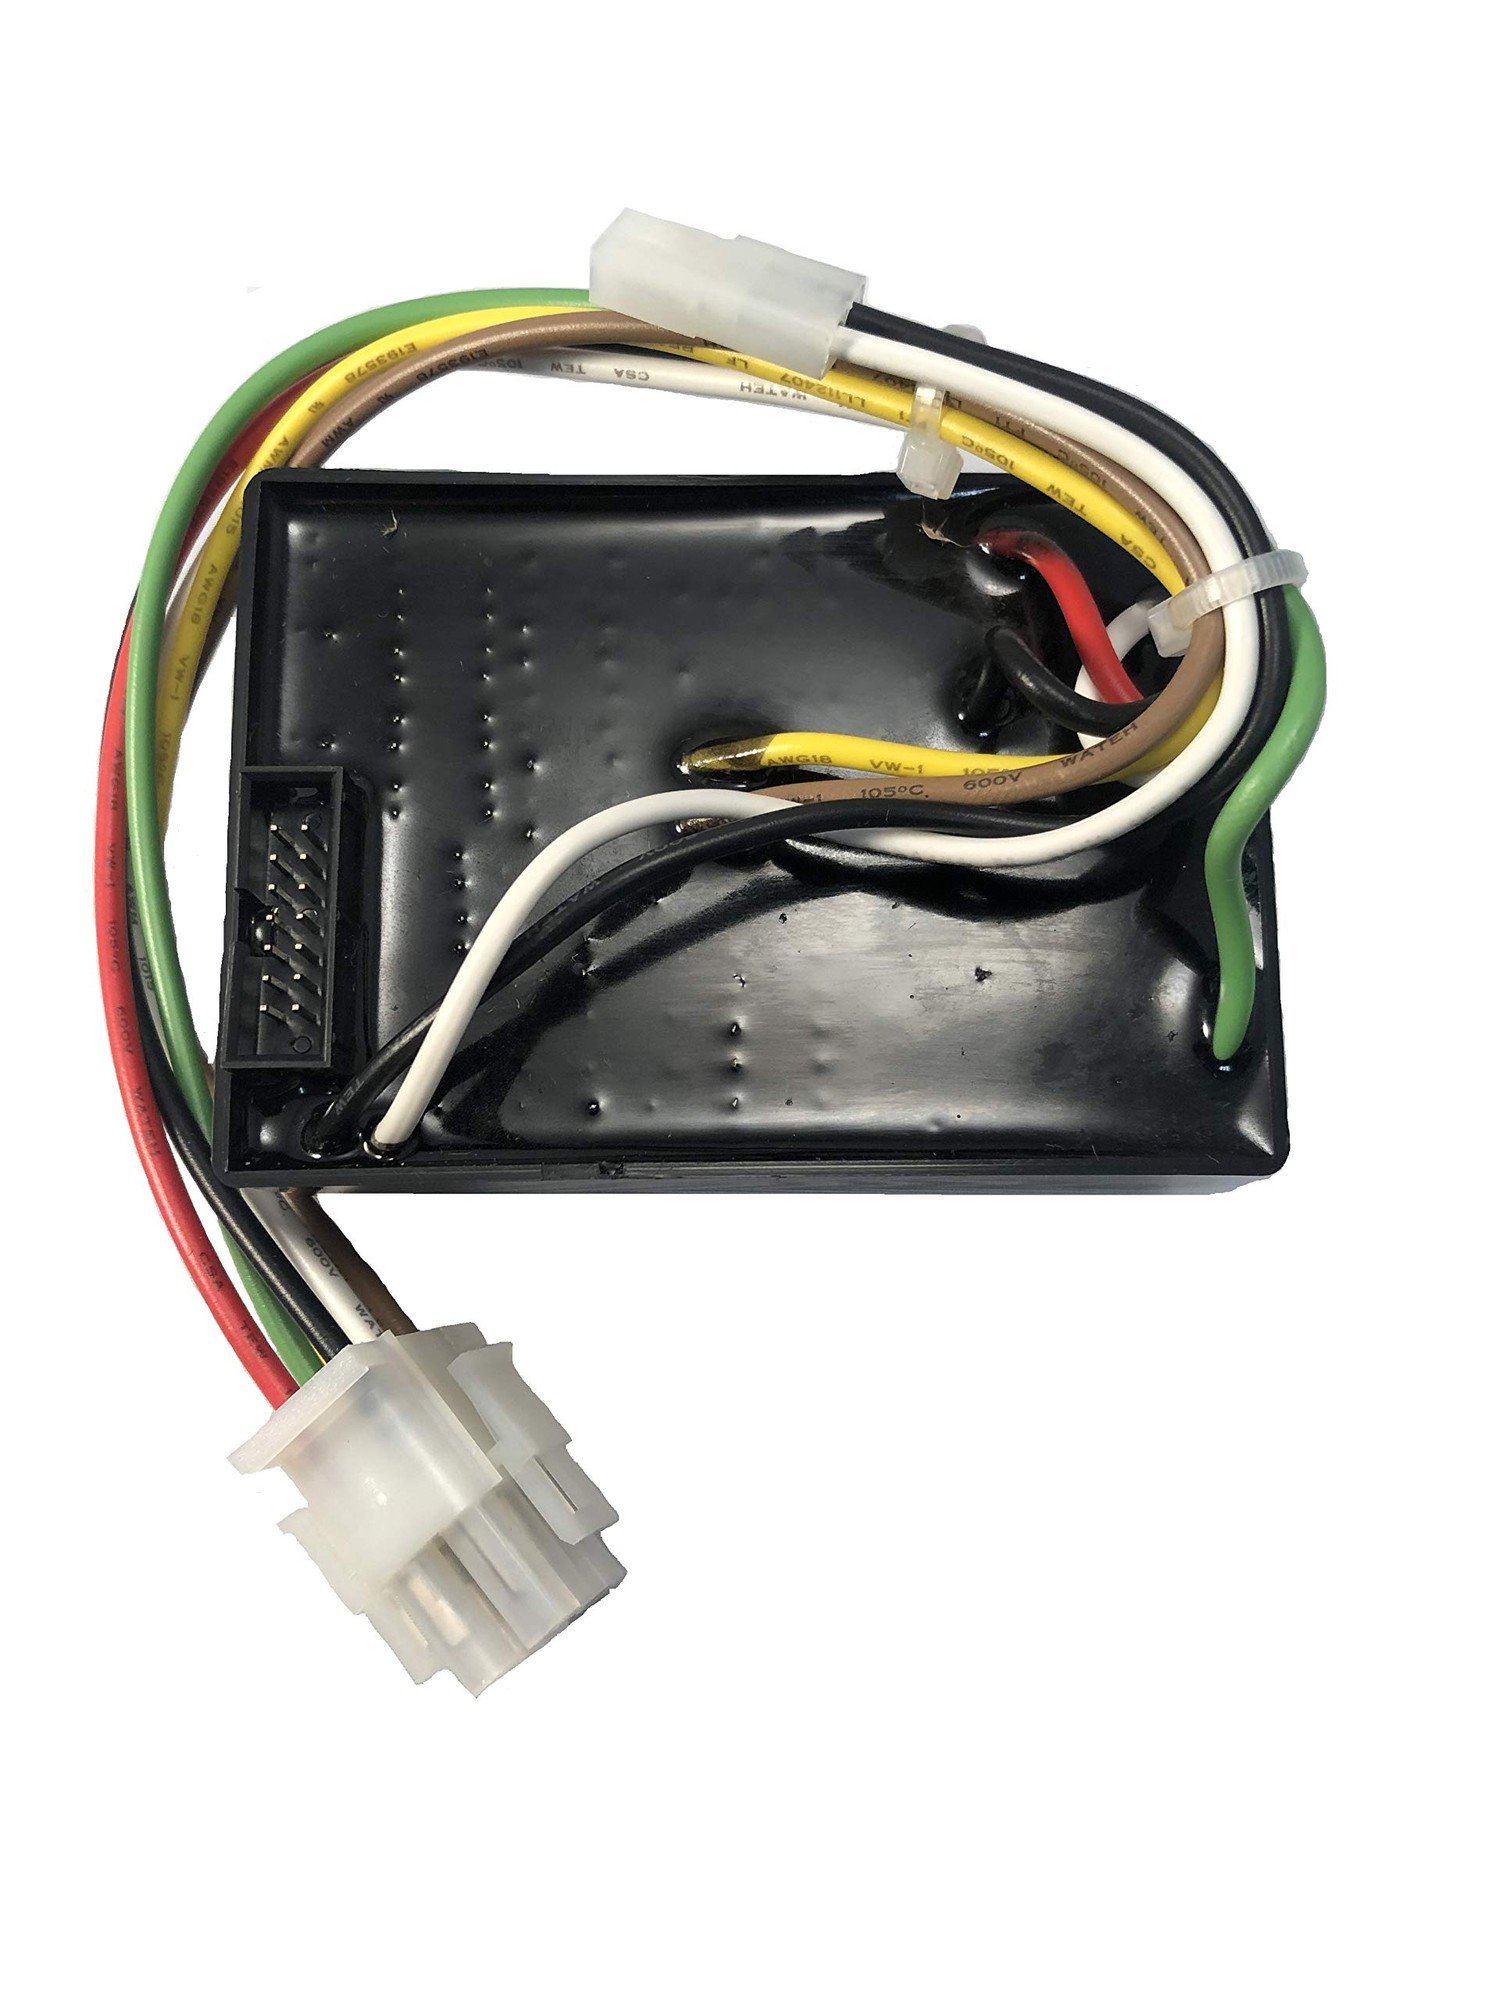 Replacement Surge Protection For 50 Amp Hughes Voltmeter